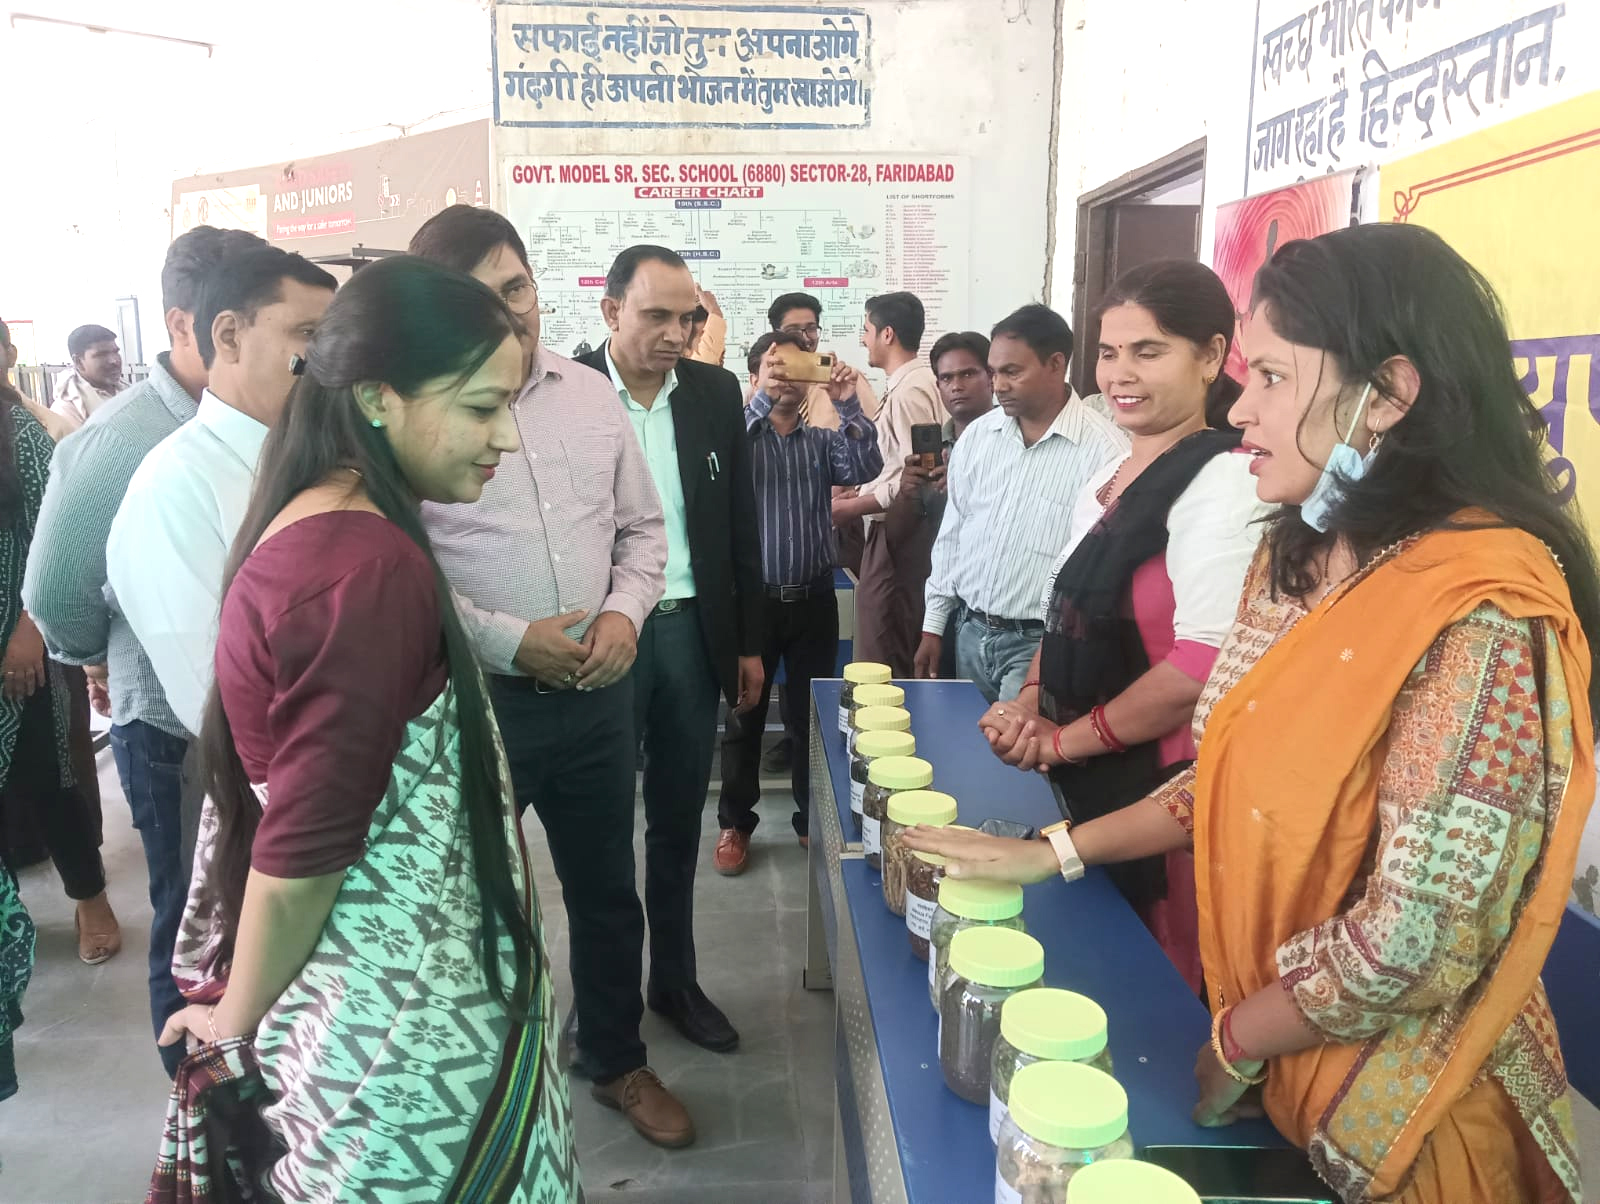 Megha service camp of government's welfare schemes completed through Dalsa: CJM Sukirti Goyal